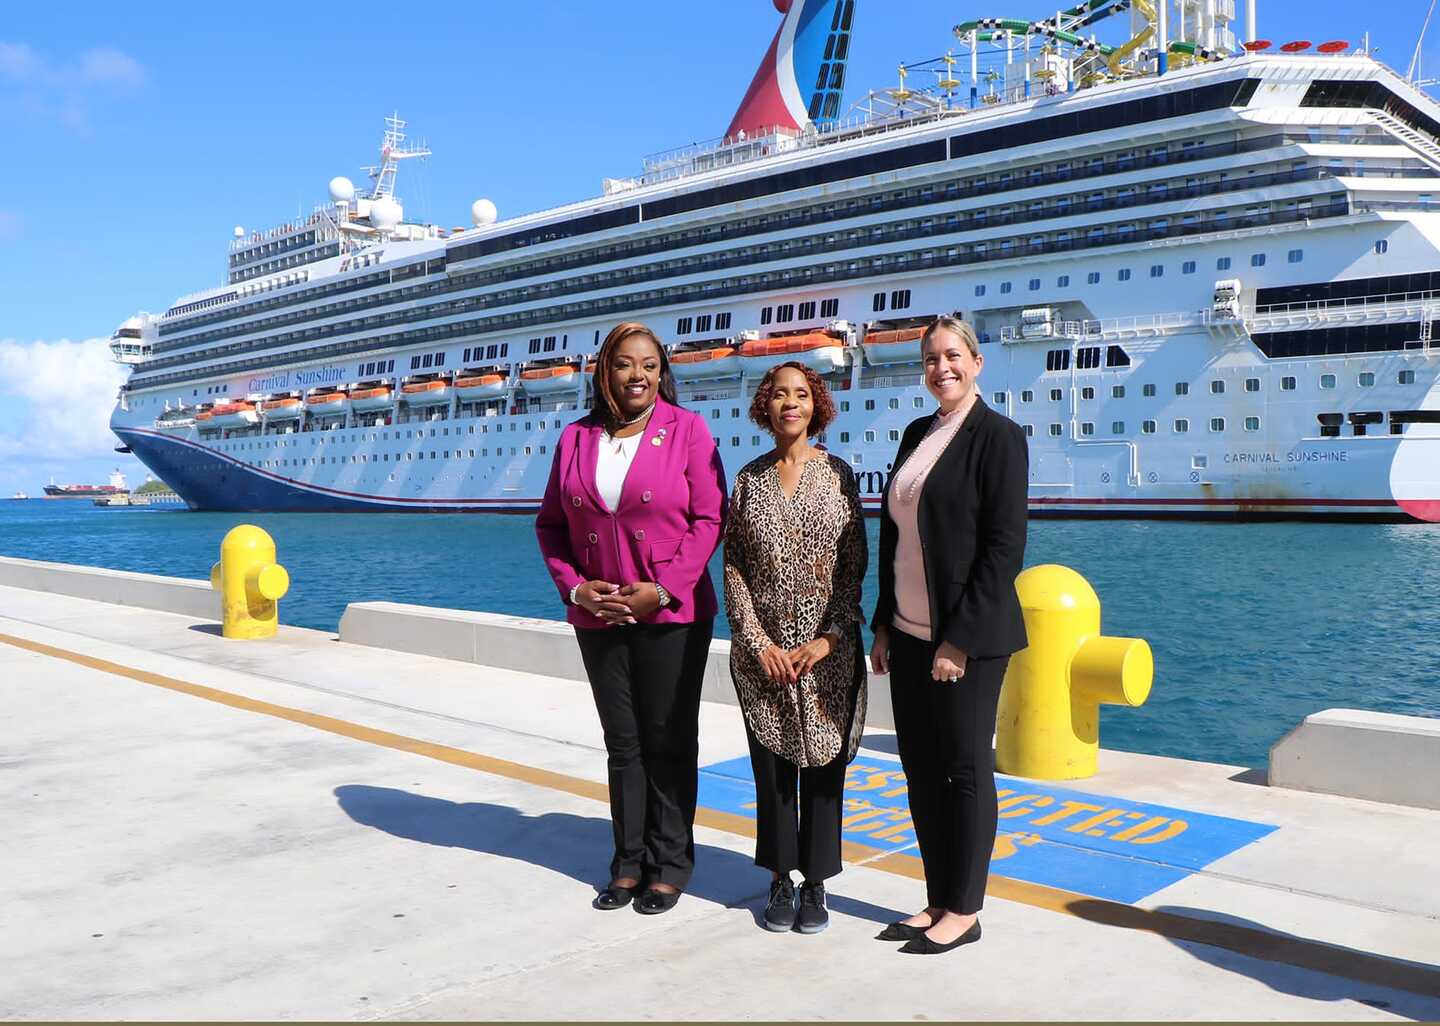 First Lady of Botswana Neo Masisi Explores the Rich Culture of The Bahamas During Visit To Nassau Cruise Port